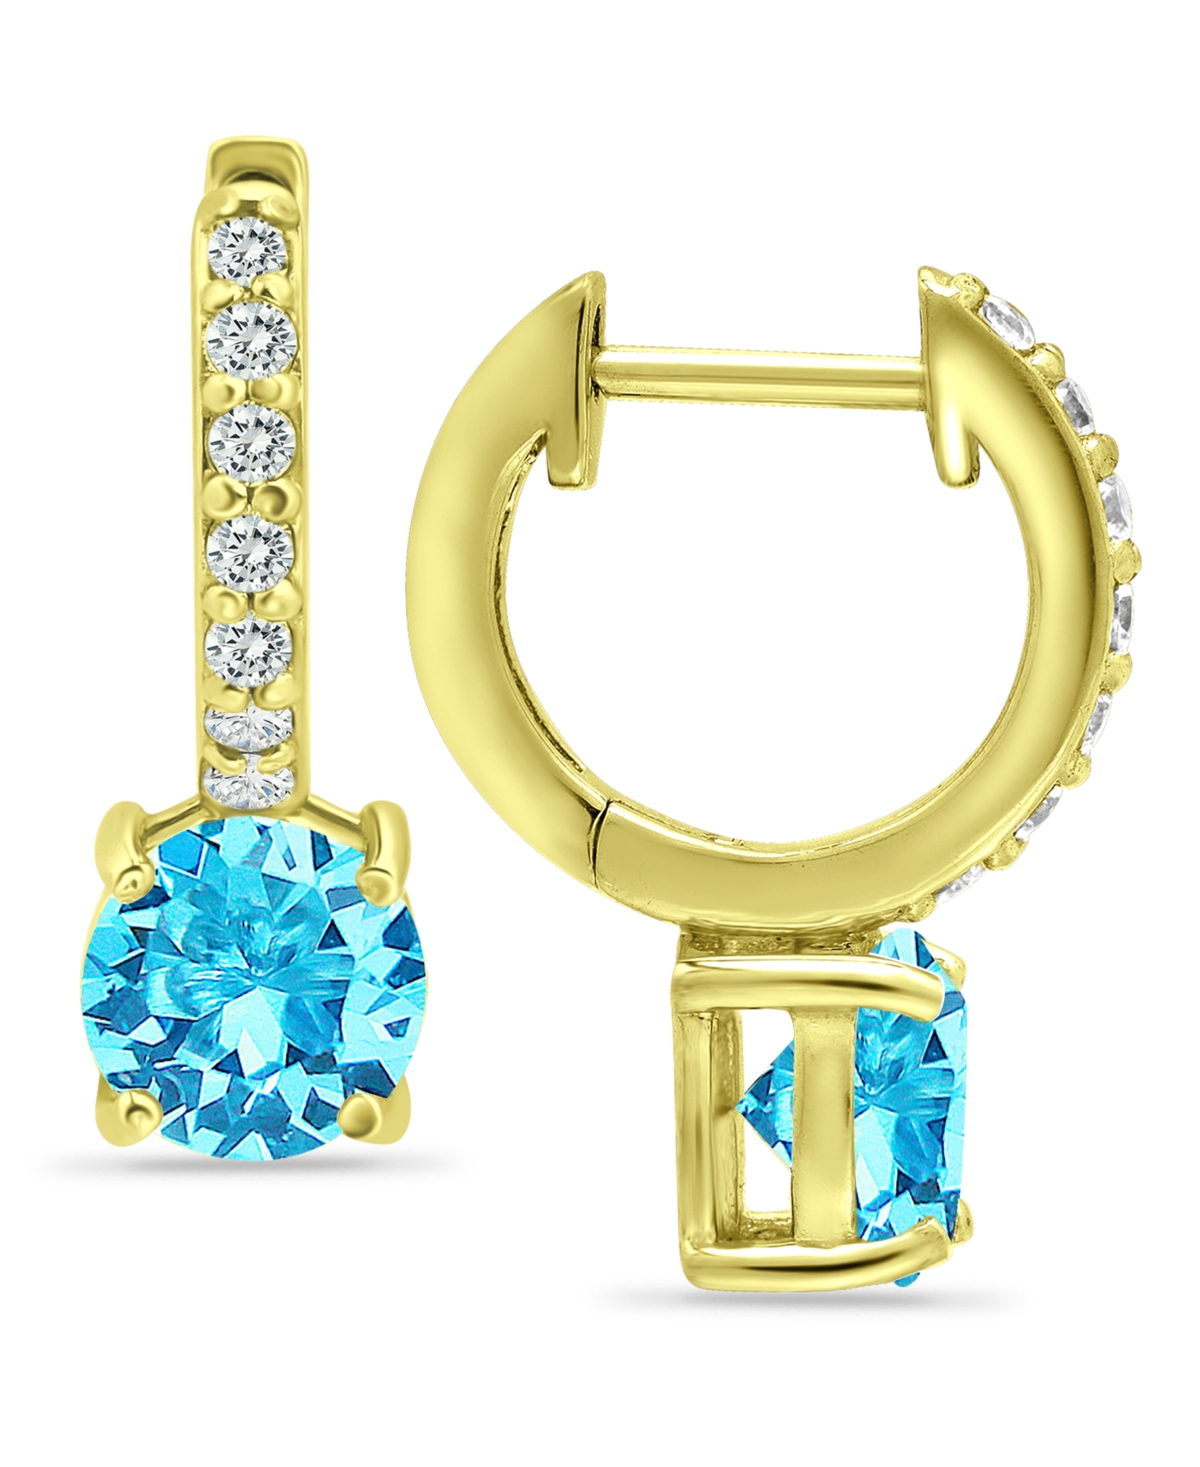 Giani Bernini Colored Cubic Zirconia Huggie Hoop Earrings in Sterling Silver or 18k Gold over Silver (Also Available in Lab Created Opal)